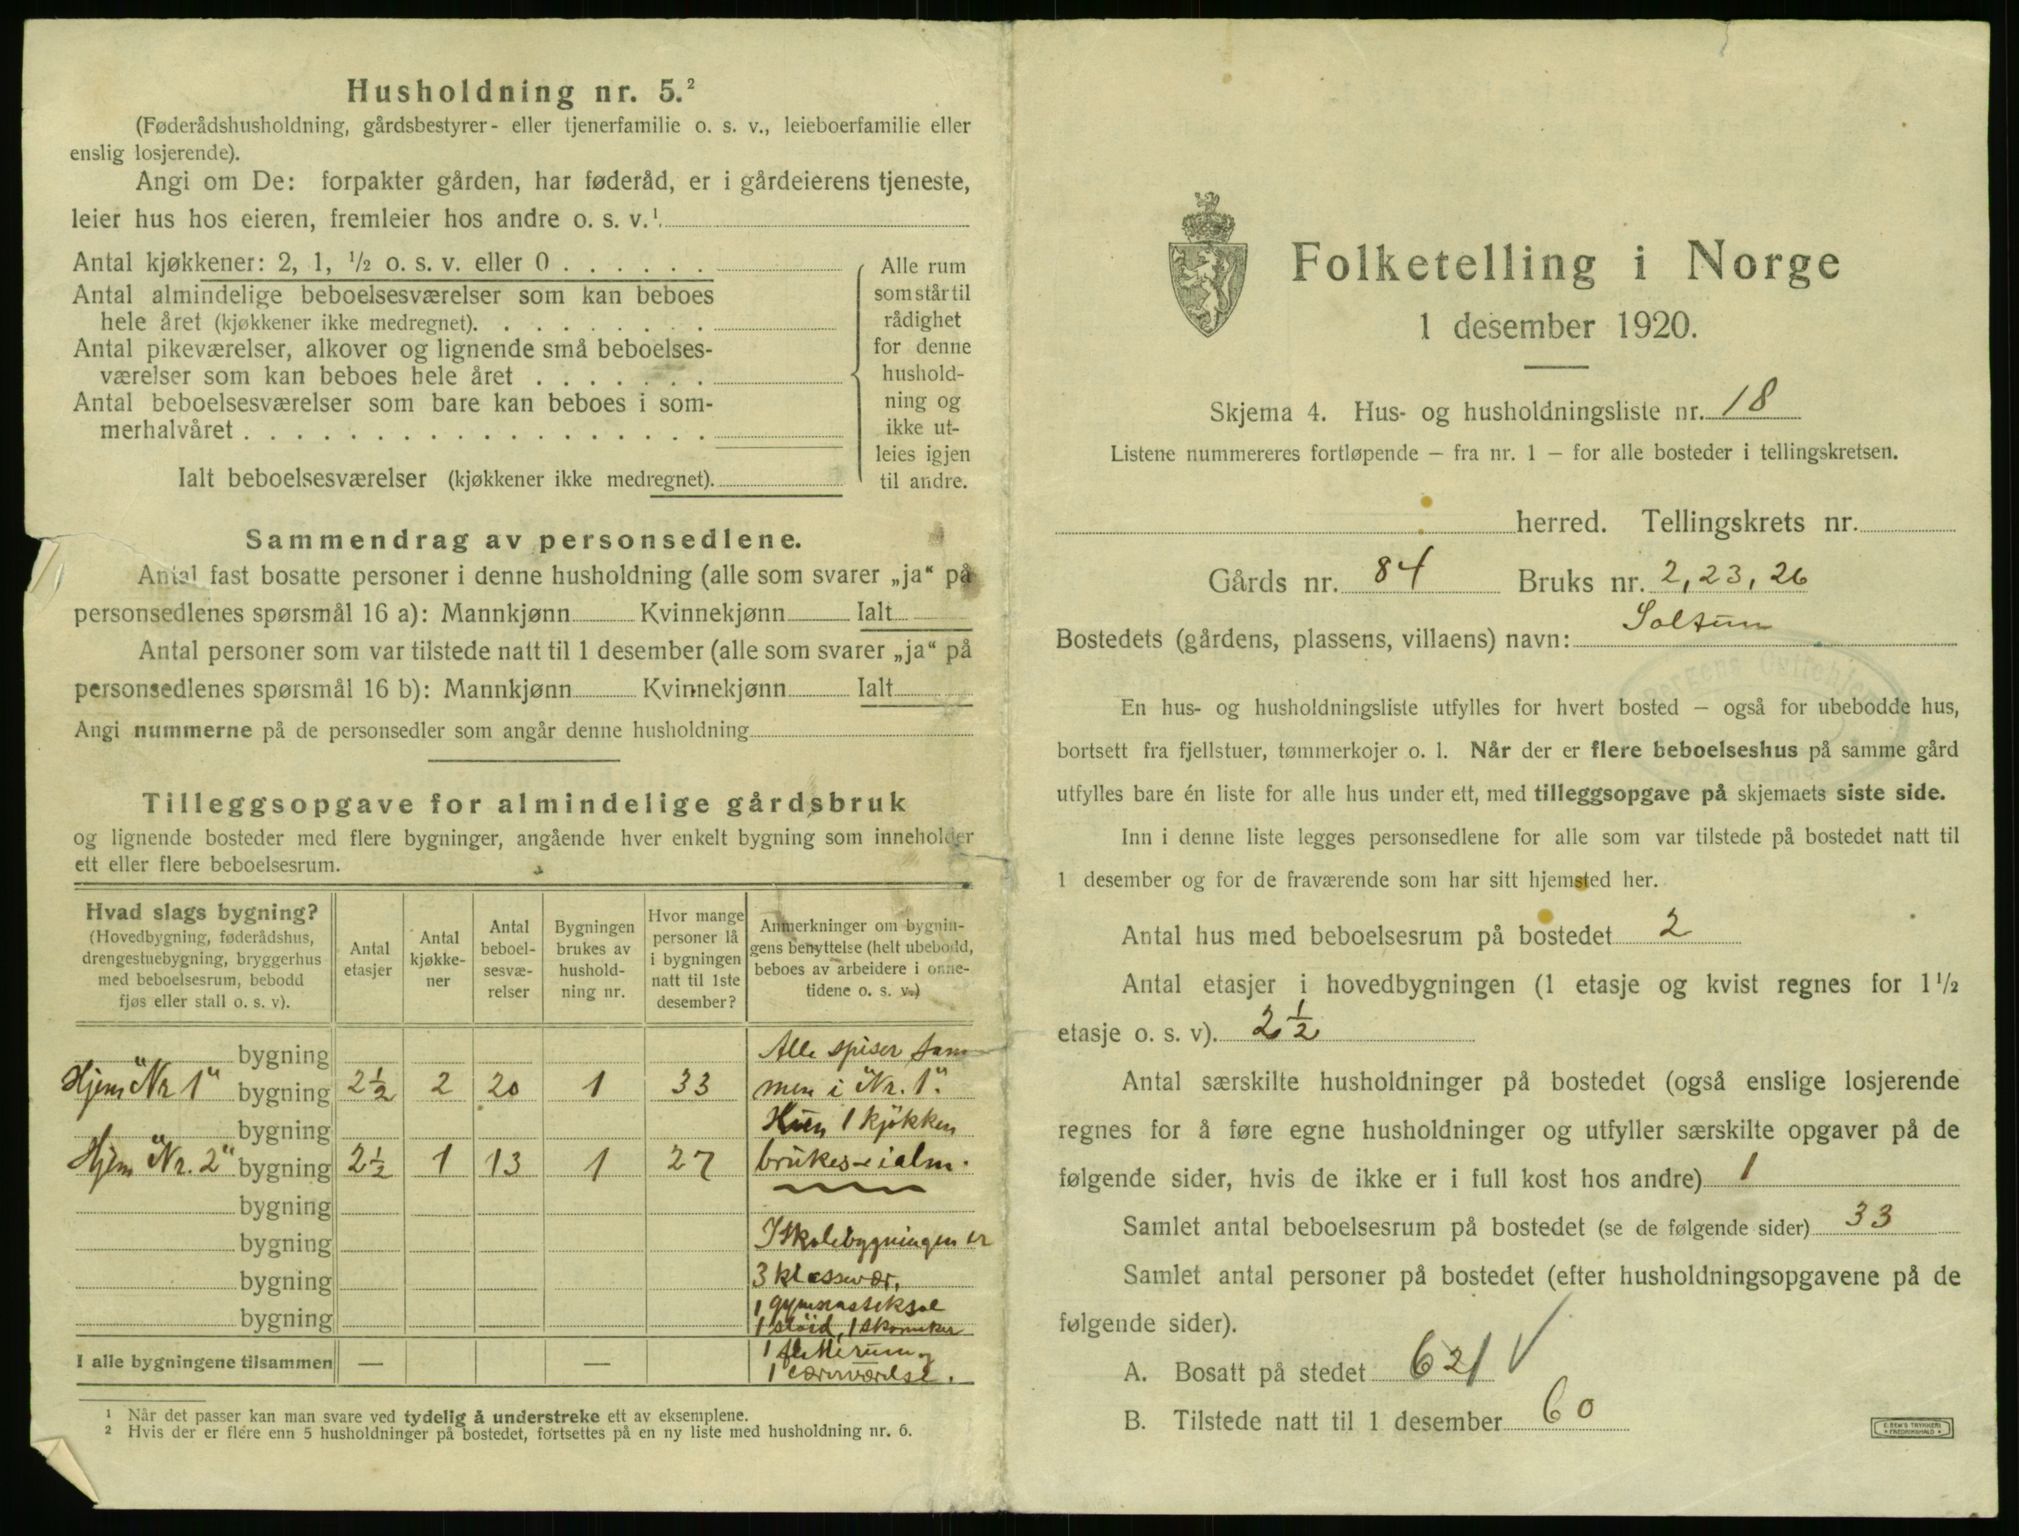 RA, 1920 census: Additional forms, 1920, p. 21